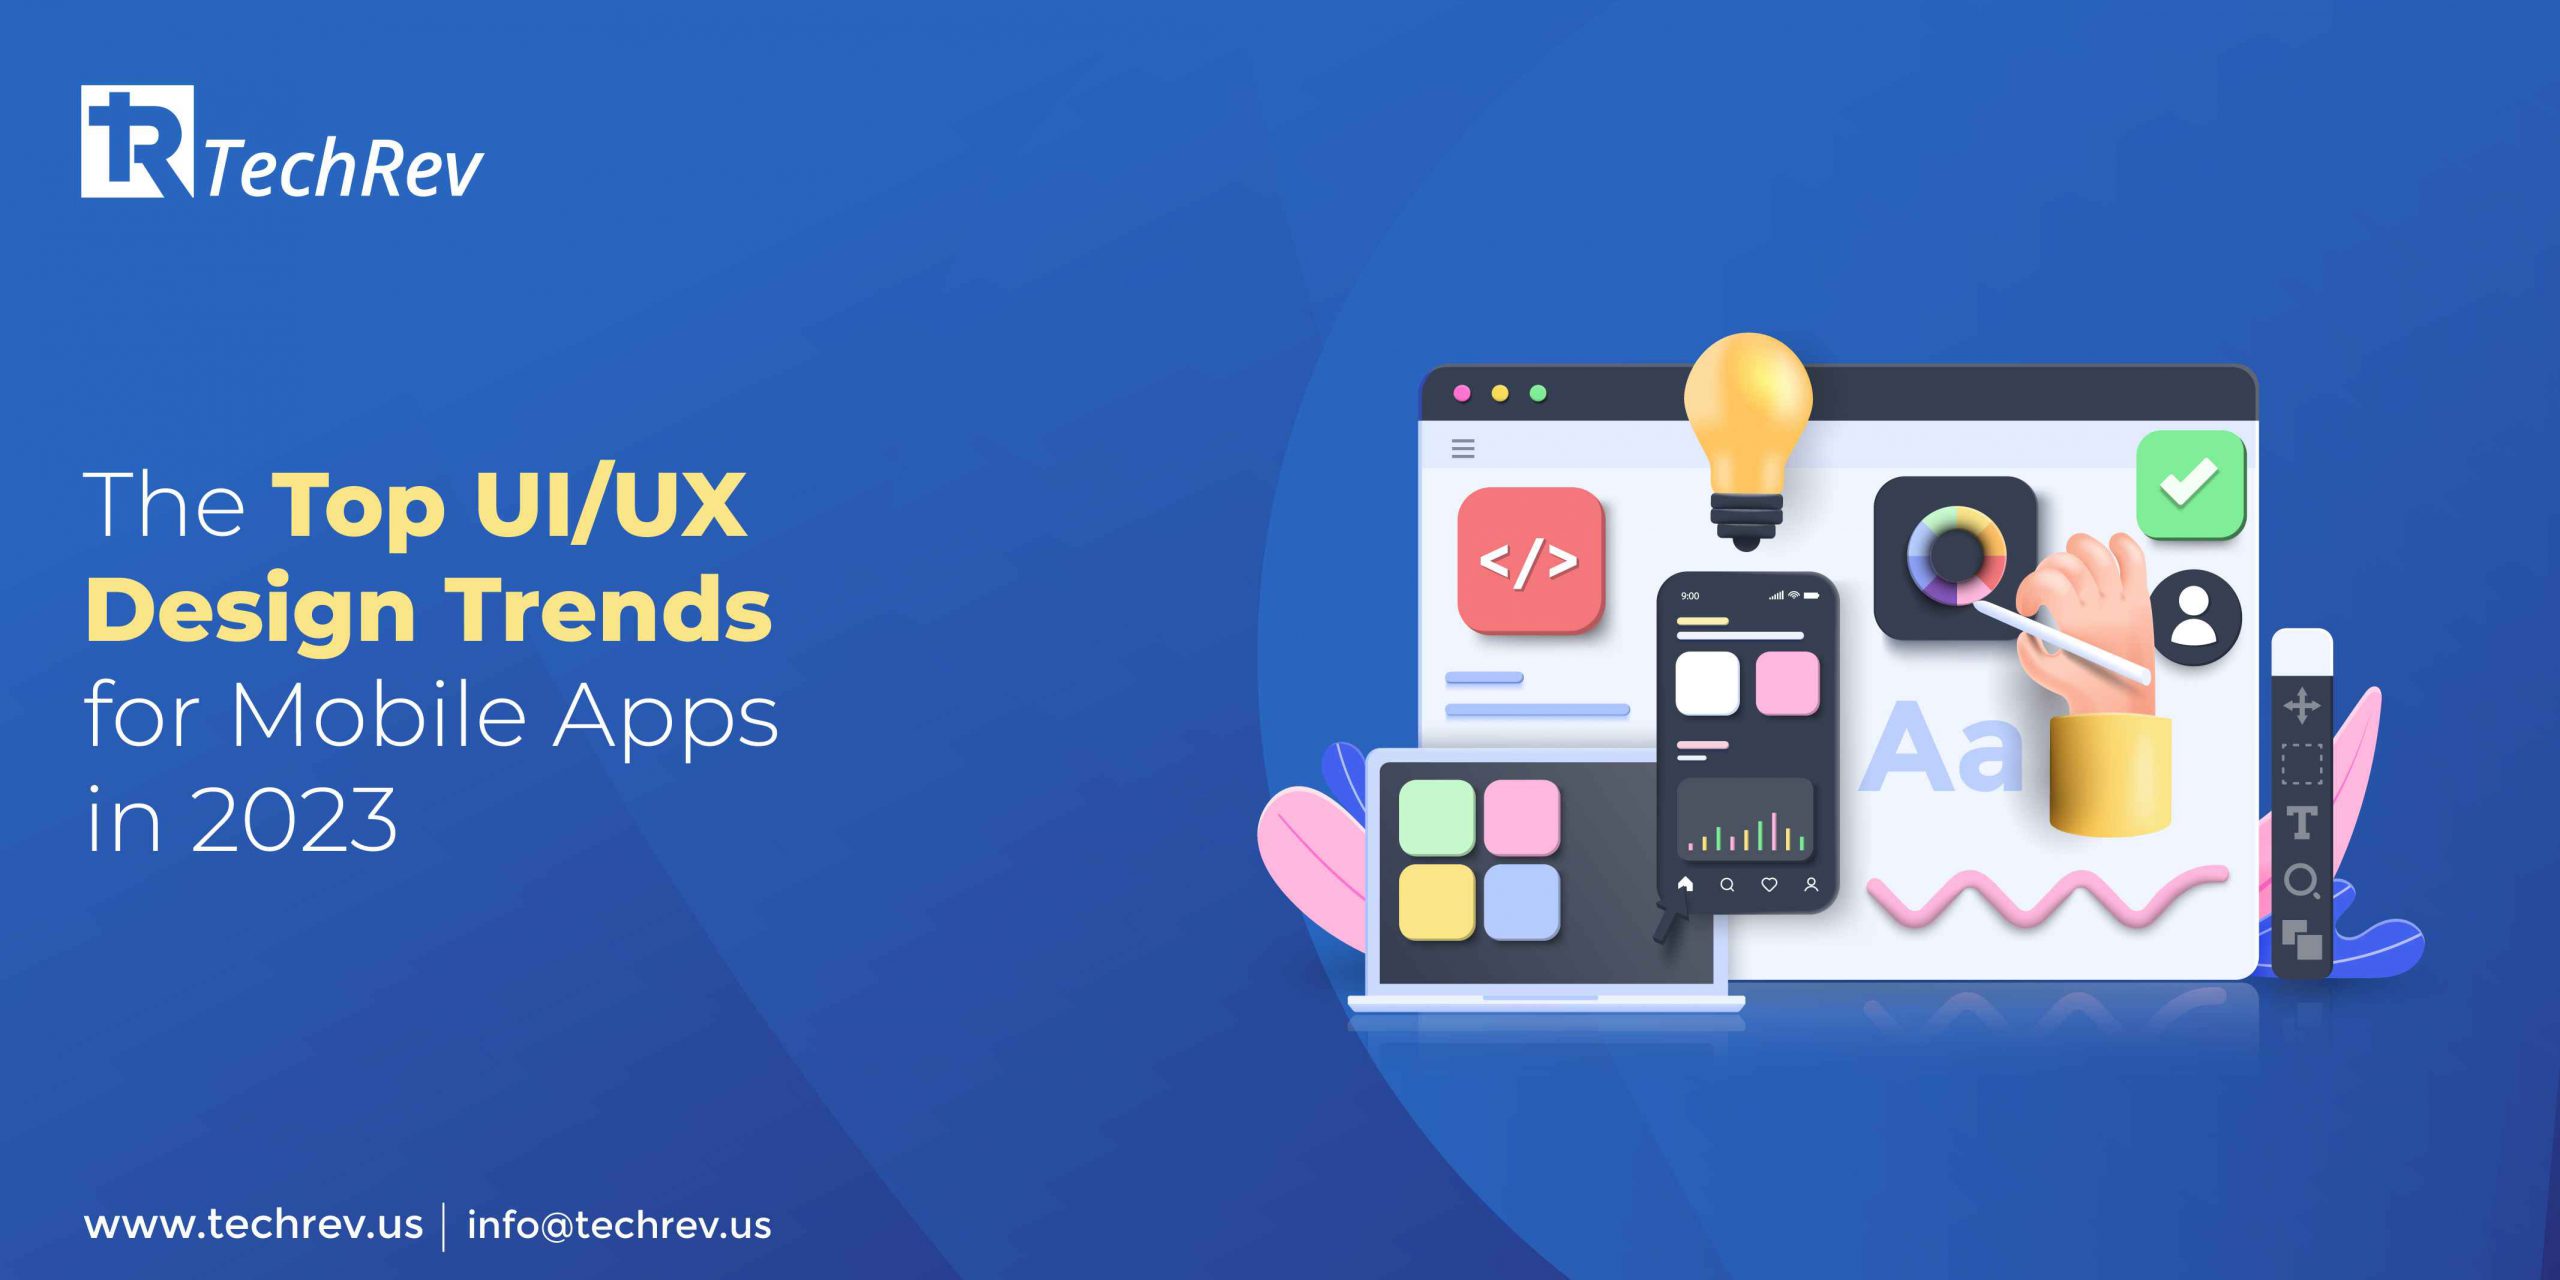 The Top UI/UX Design Trends for Mobile Apps in 2023